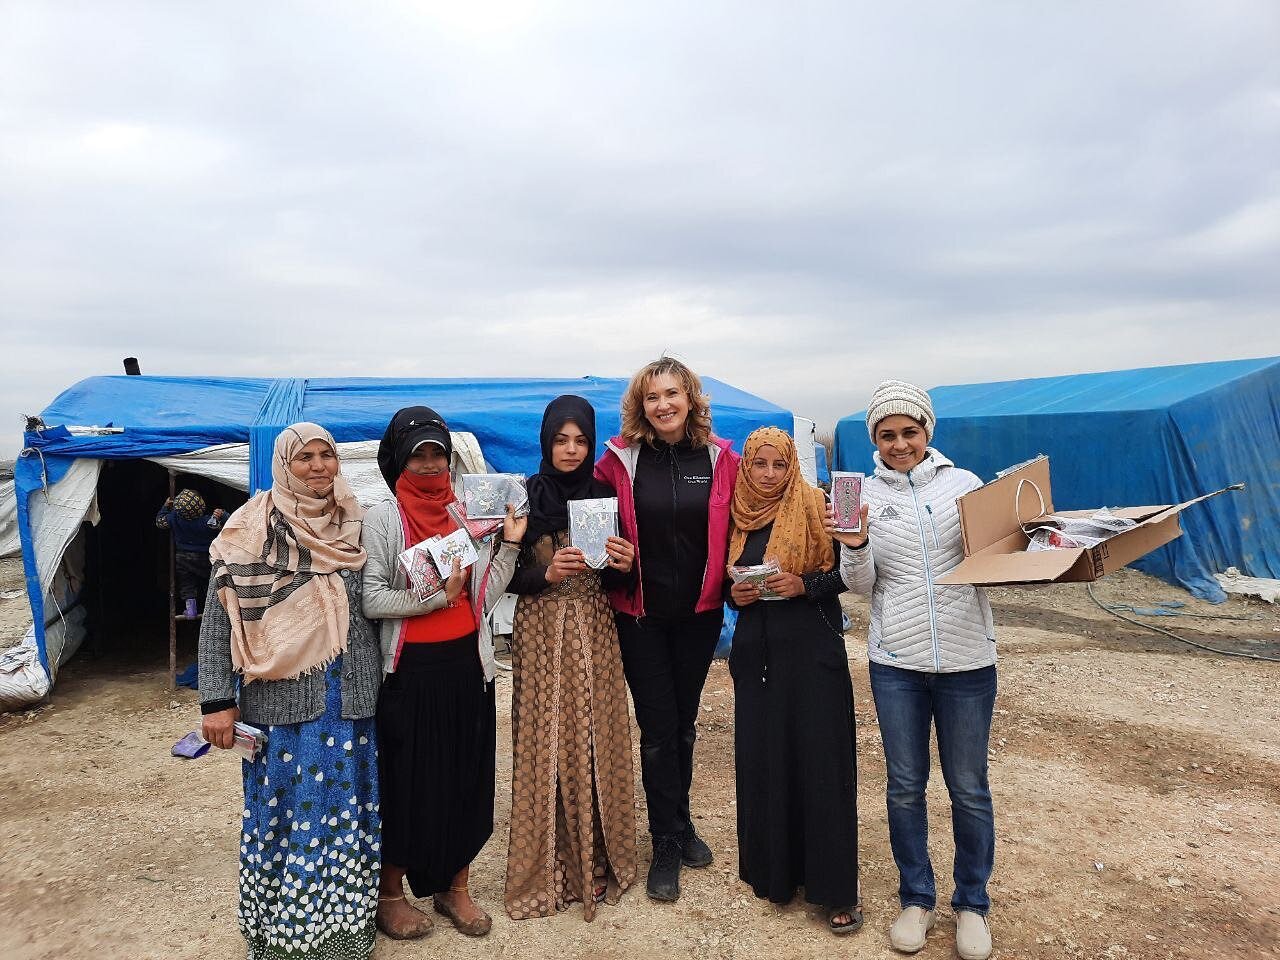 Refugee women and children are invisible. But we are taking steps to change that. On our last trip, we sat down with refugee women and asked them what&nbsp;they&nbsp;needed, and listened to the solutions&nbsp;they&nbsp;proposed. The feedback these wo